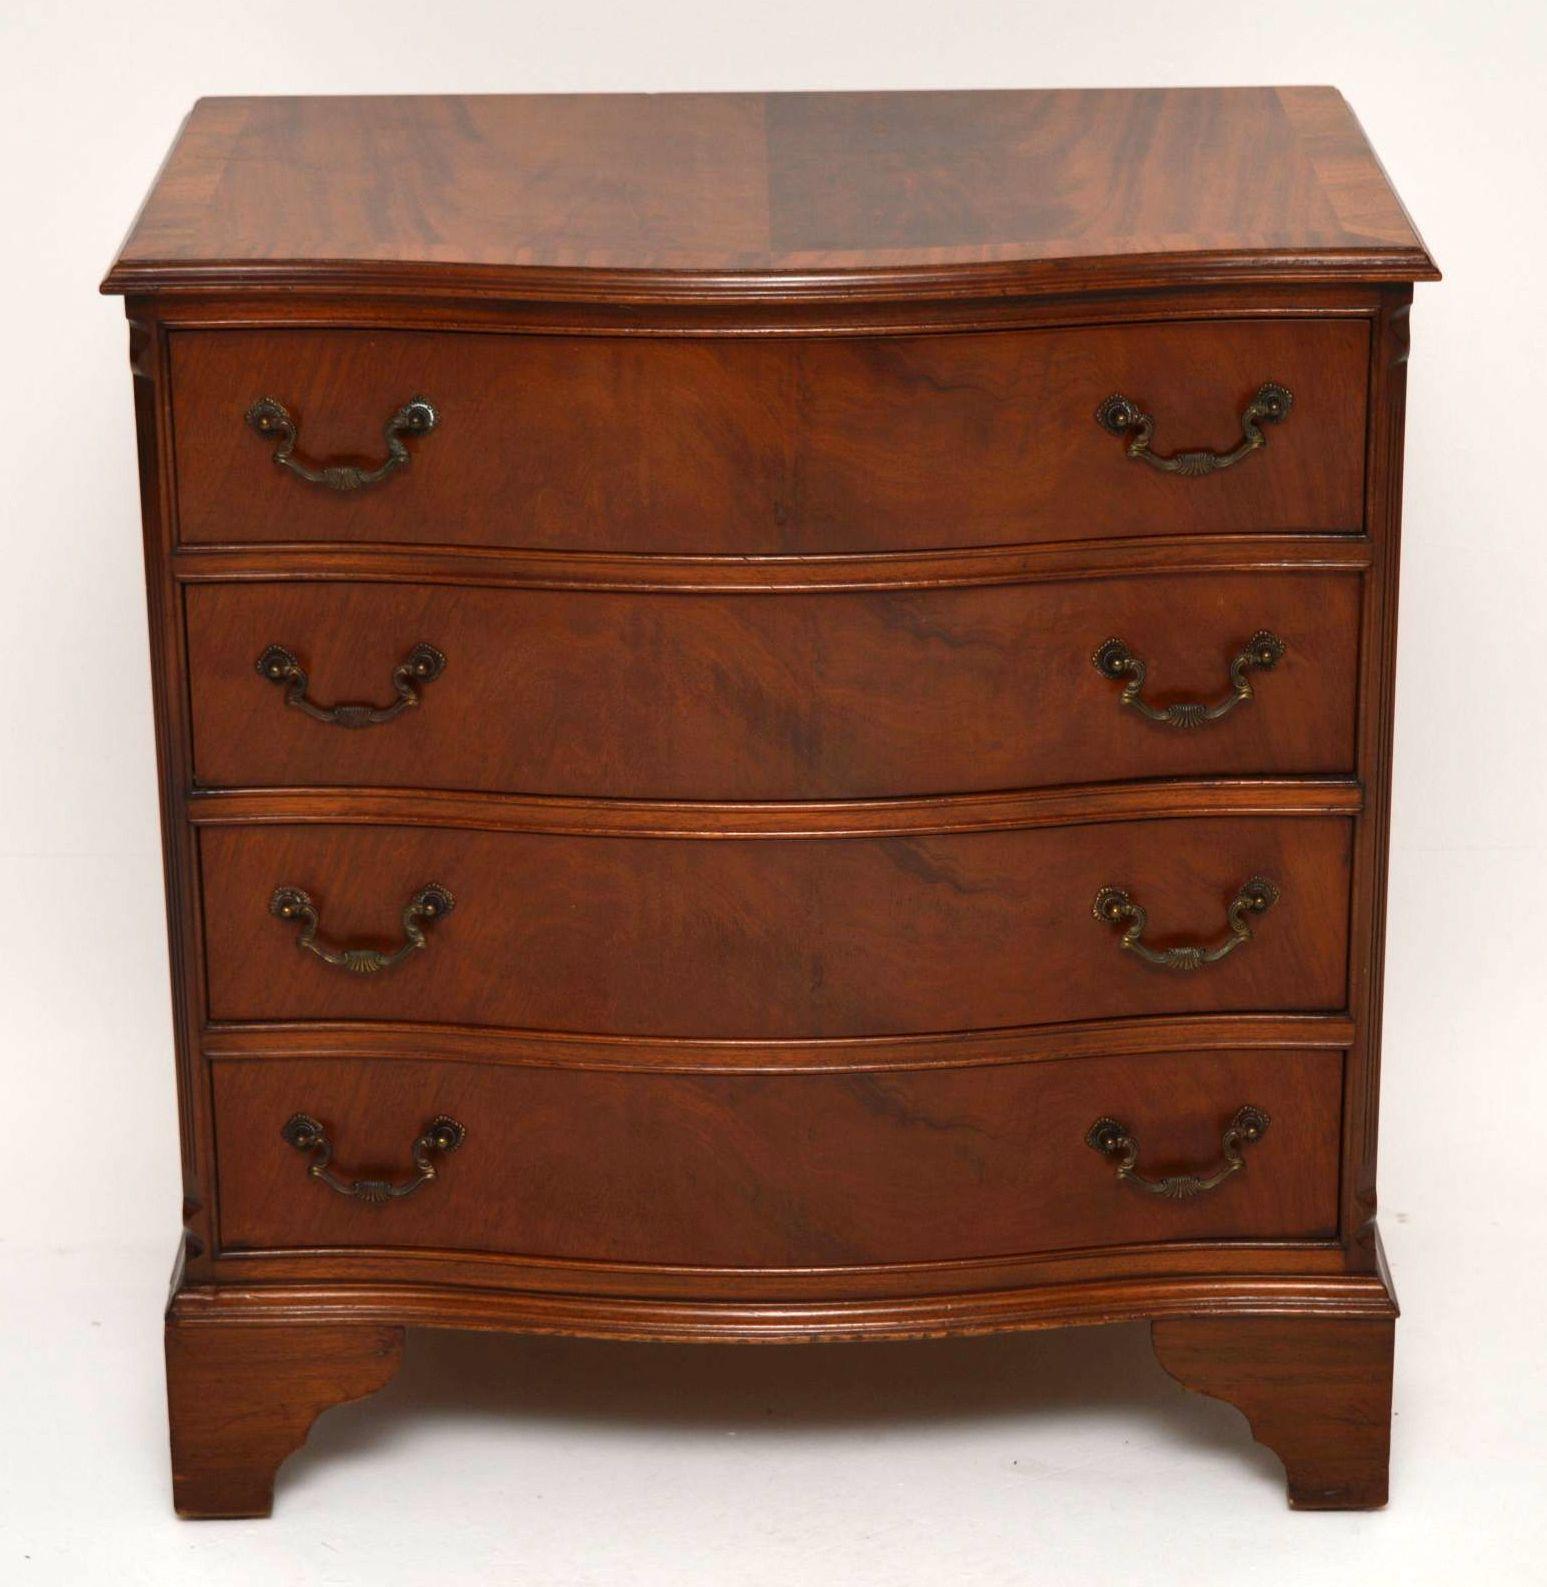 Antique Georgian style flame mahogany chest of drawers with a serpentine shaped front, in excellent condition dating from circa 1950s period. It has a cross banded top, four drawers with original brass handles, reeded canted corners and sits on